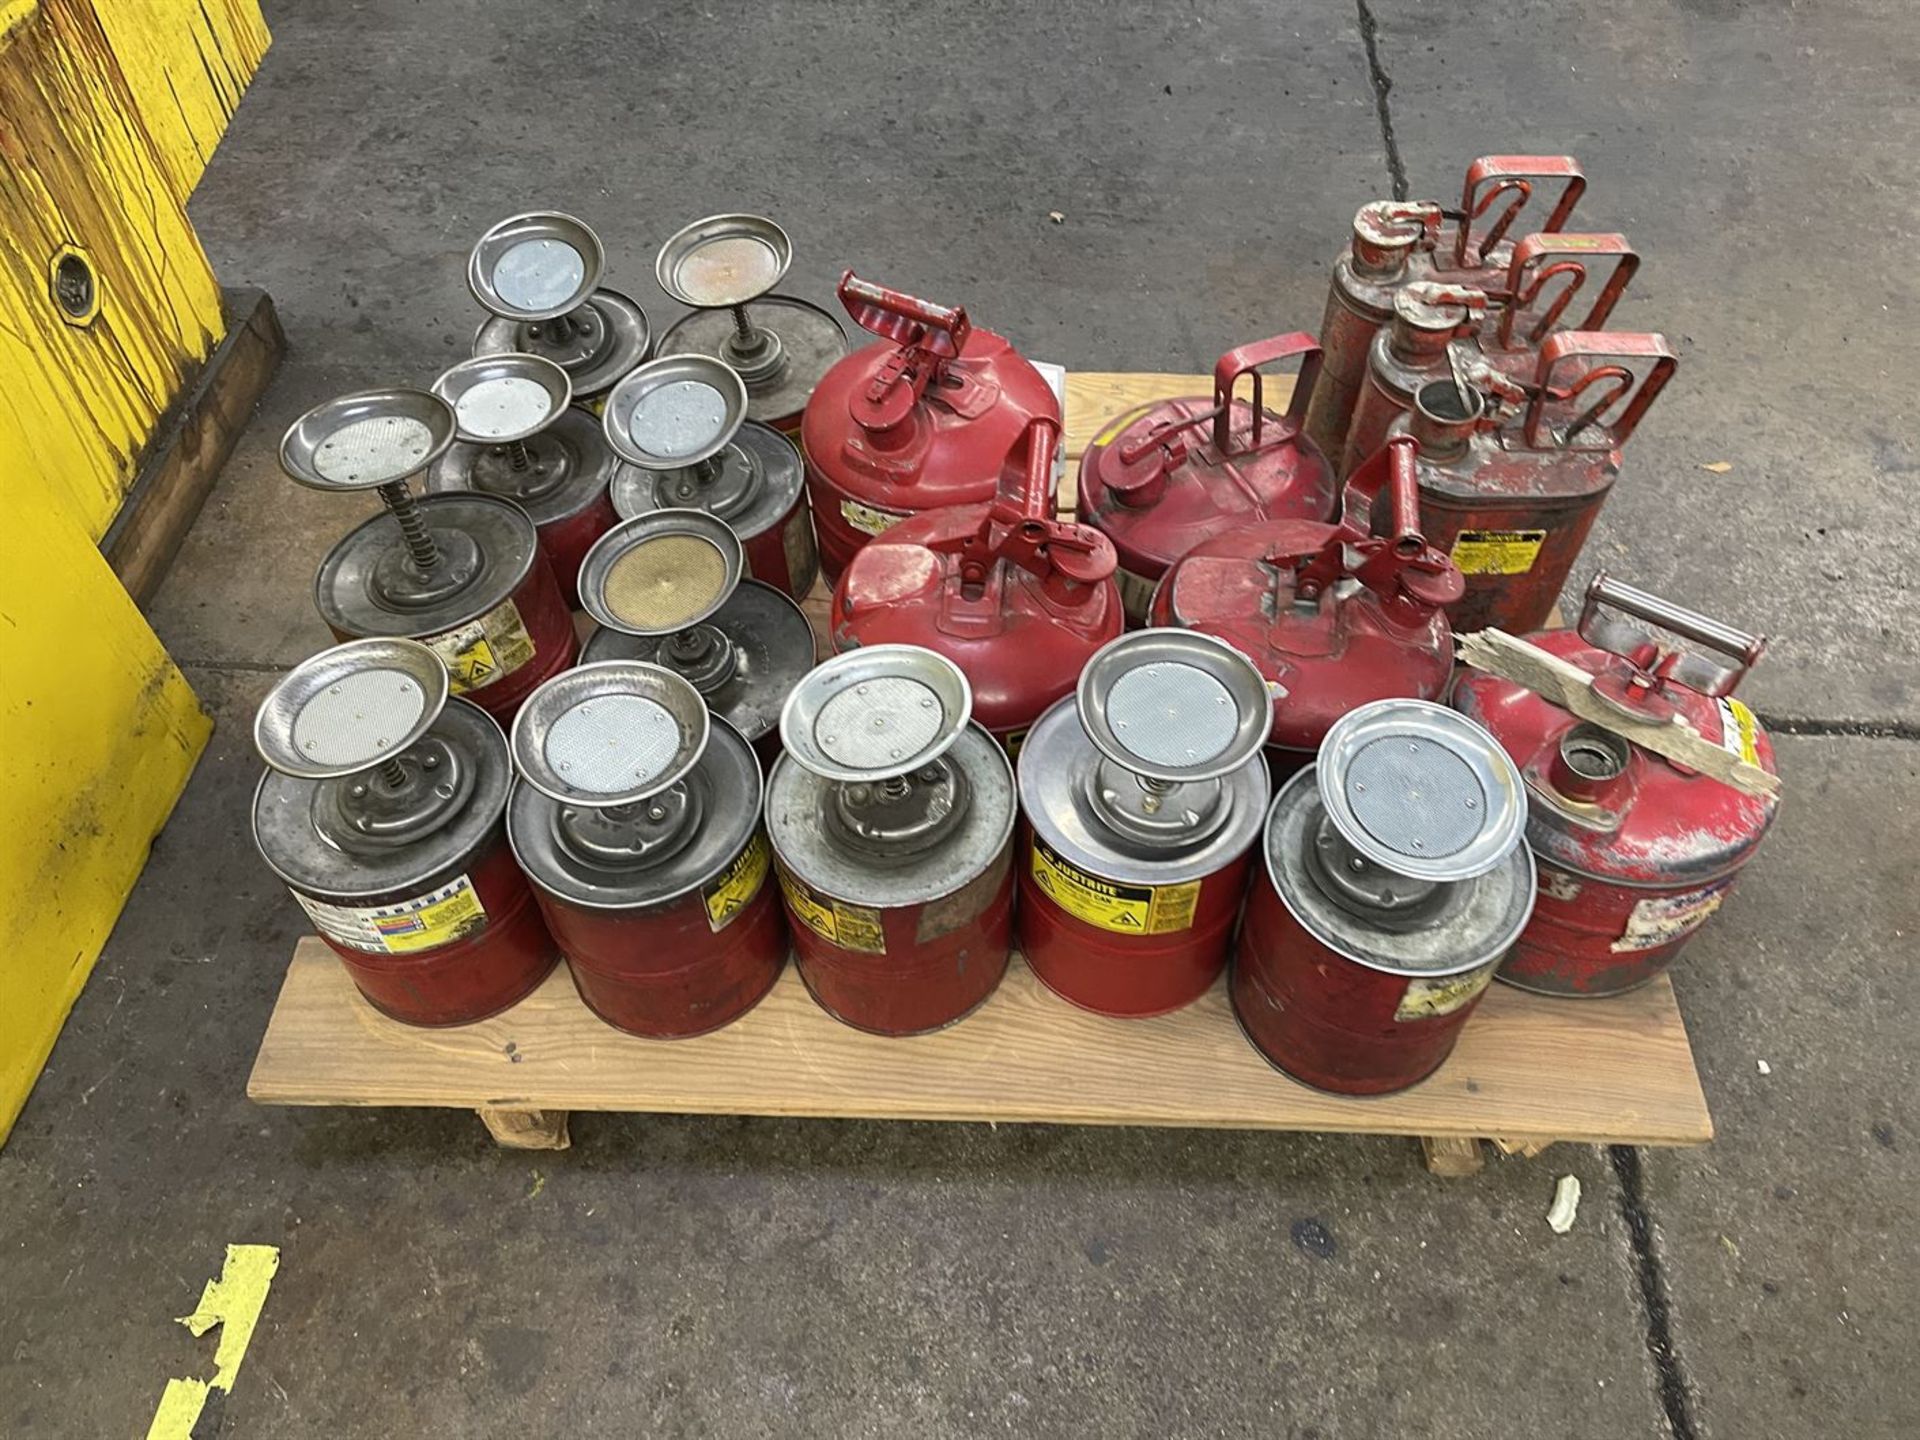 Lot of JUSTRITE Plunger Cans and Safety Cans - Image 2 of 2